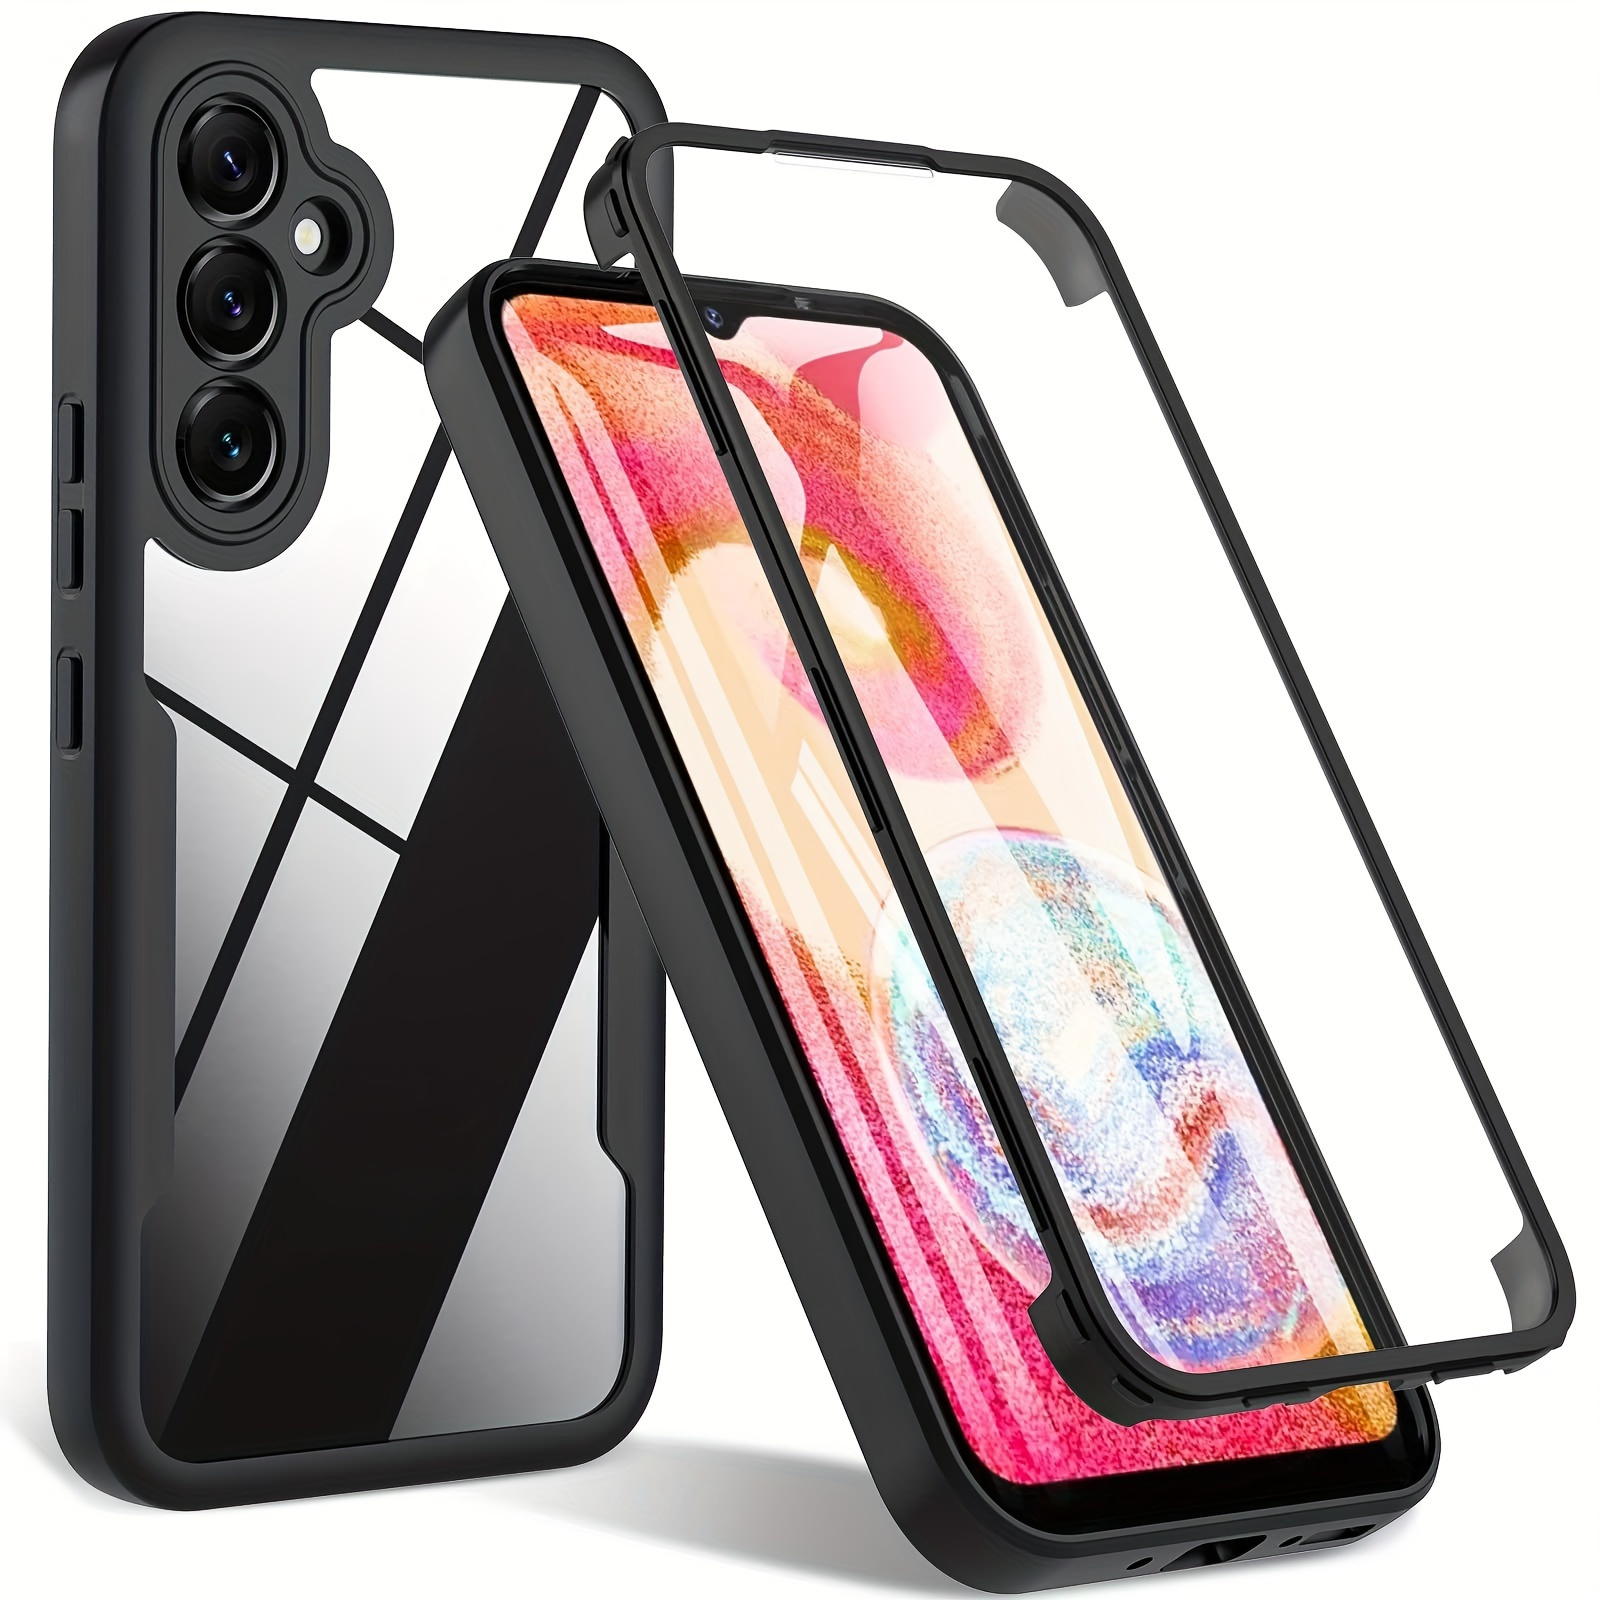 

360 Degree Case For Samsung Galaxy A14 5g/ Galaxy A54 5g Dual Layer Shockproof Transparent Cover Full Body Rugged With Built-in Screen Protector Men Women.